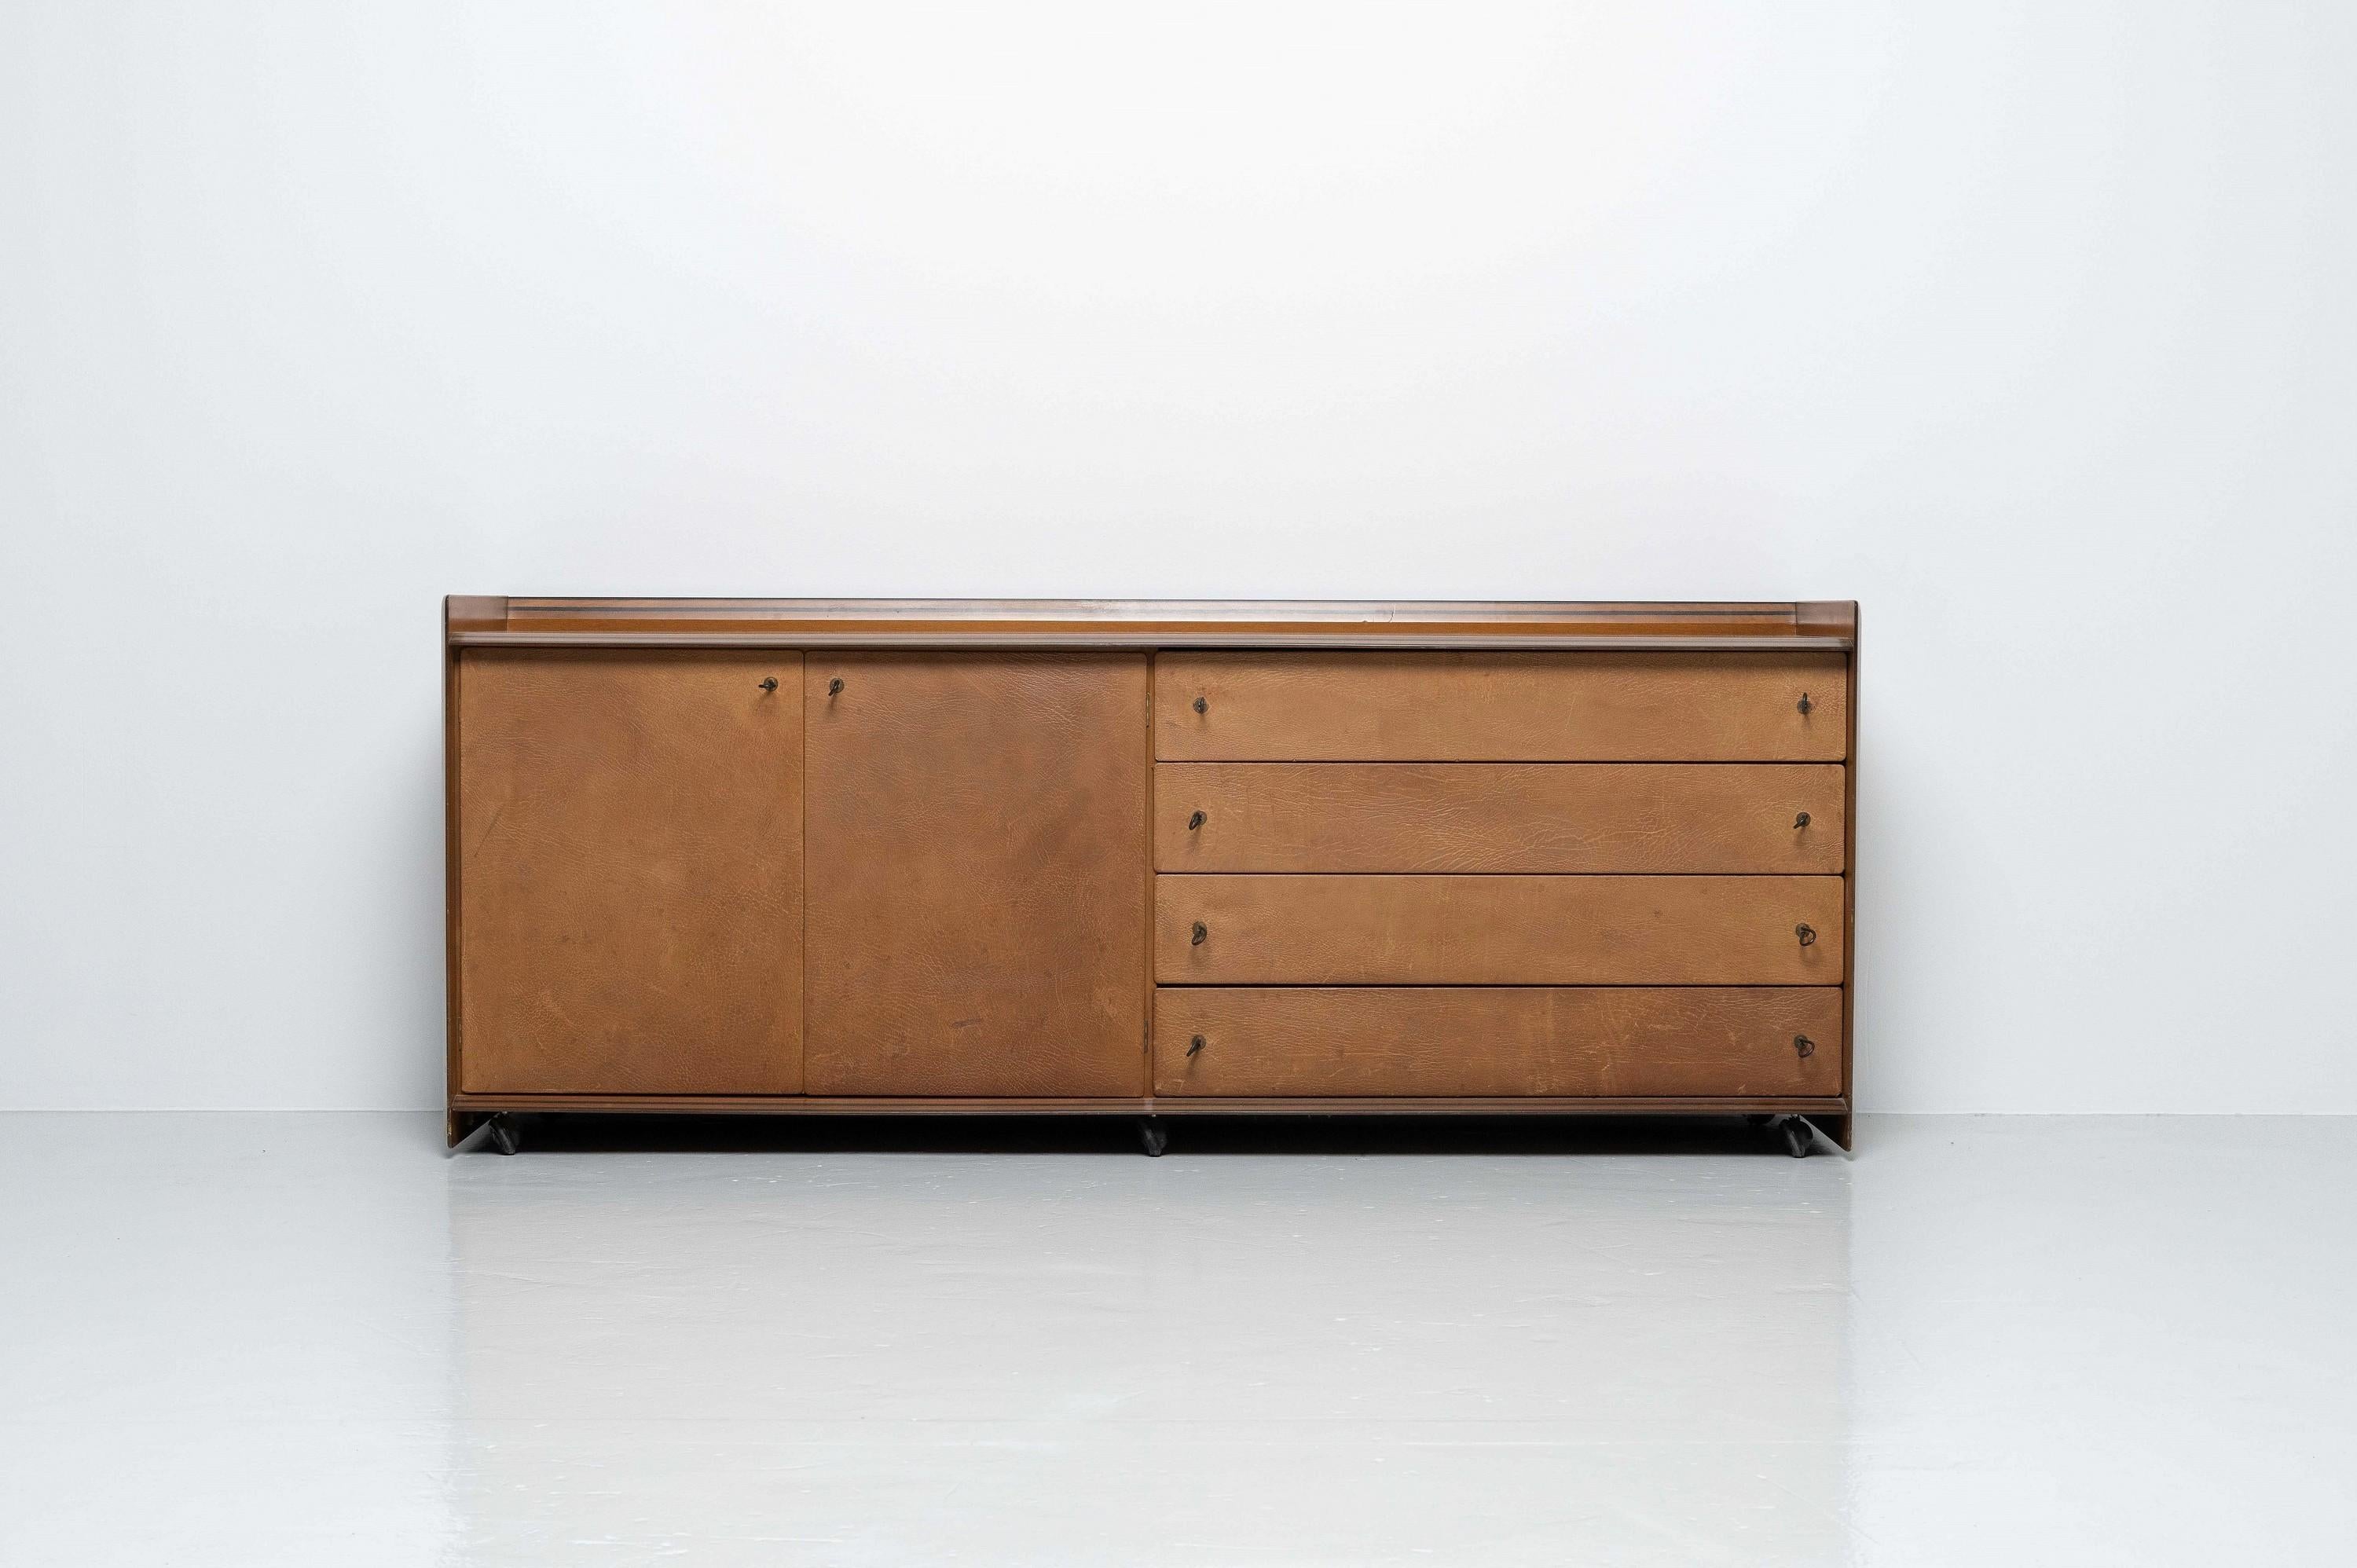 Nice and fully original 'Artona' cabinet designed by Afra and Tobia Scarpa and produced in Italy by Maxalto in 1975. This cabinet is in good condition, has four pull out drawers and two doors and contains a lot of signature features Afra and Tobia